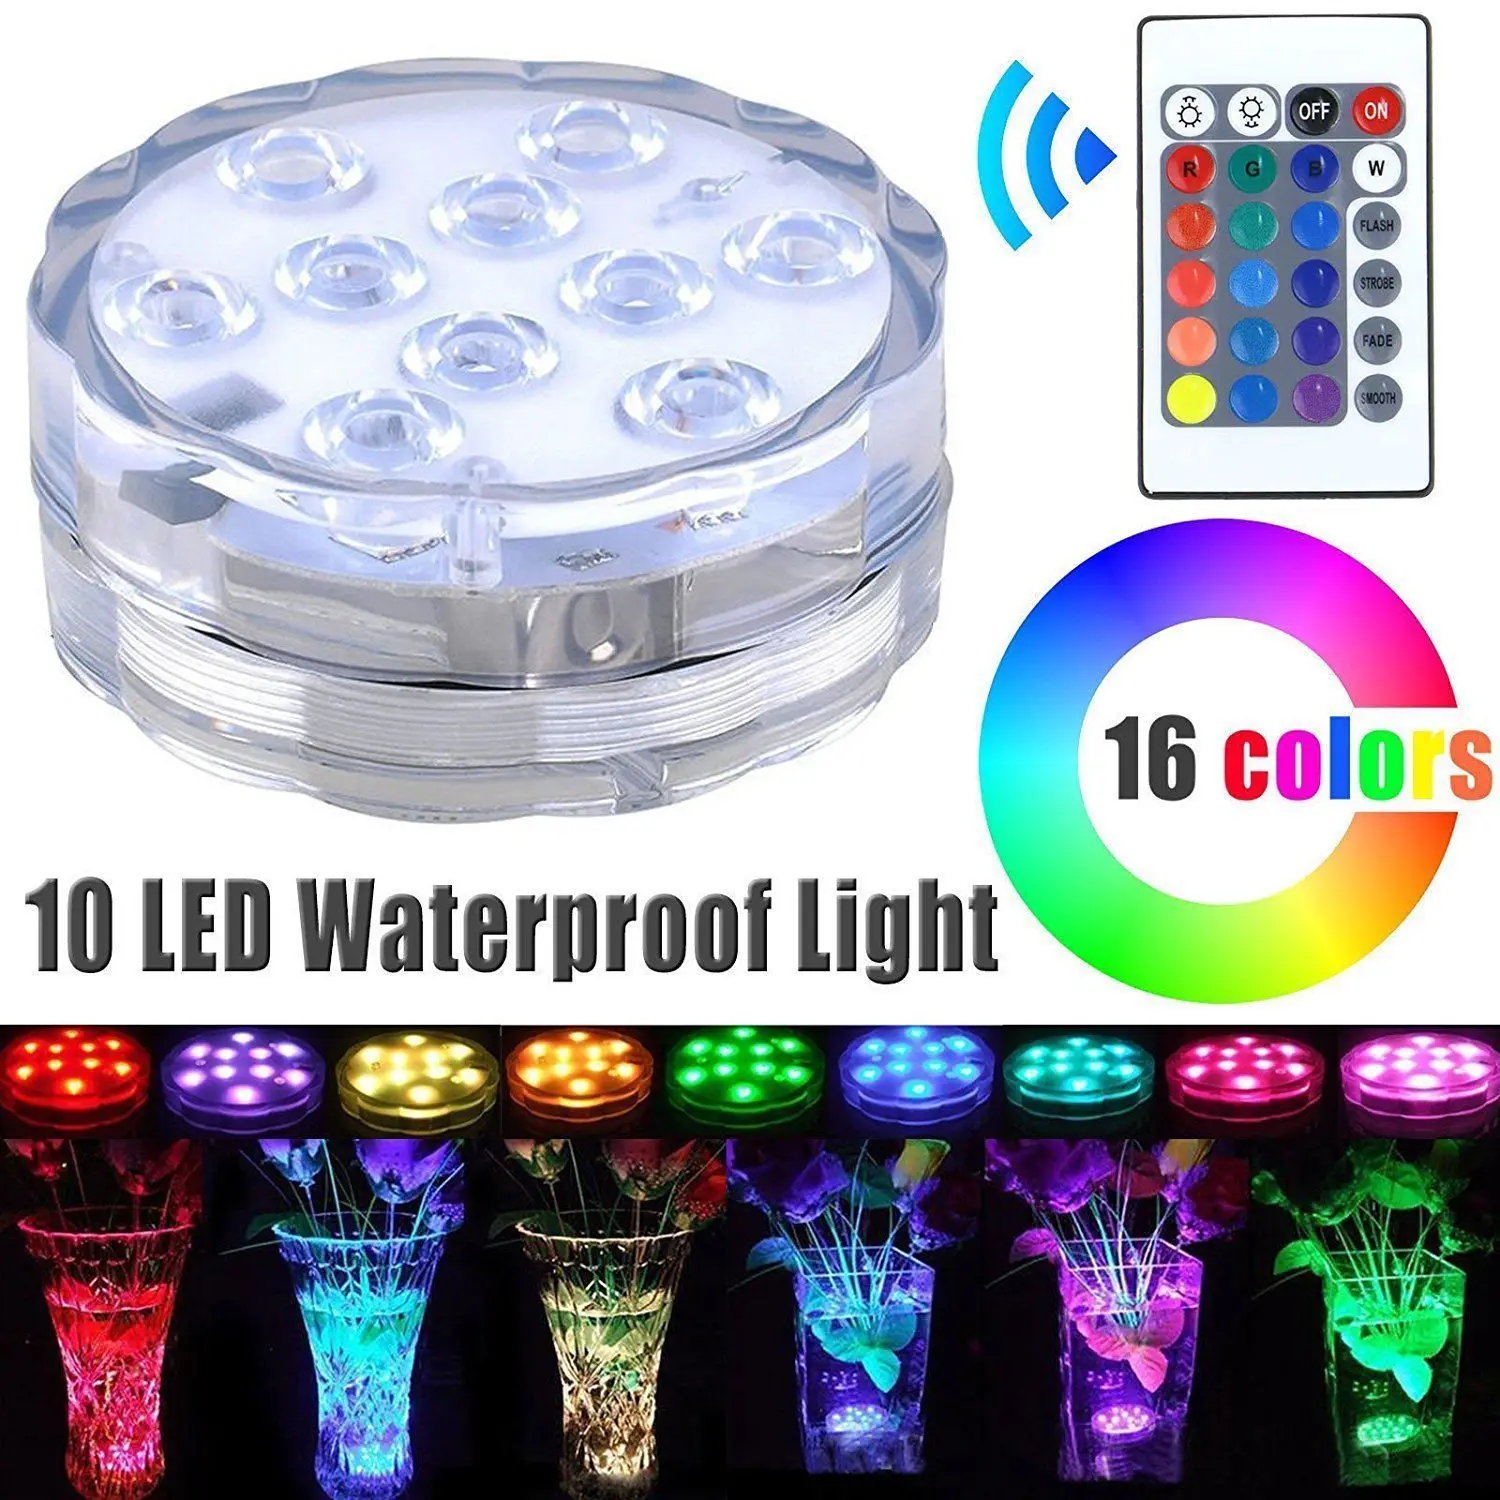 

10 Led Remote Controlled RGB Submersible Light Battery Operated Underwater Night Lamp Outdoor Vase Bowl Party Pool Accessories